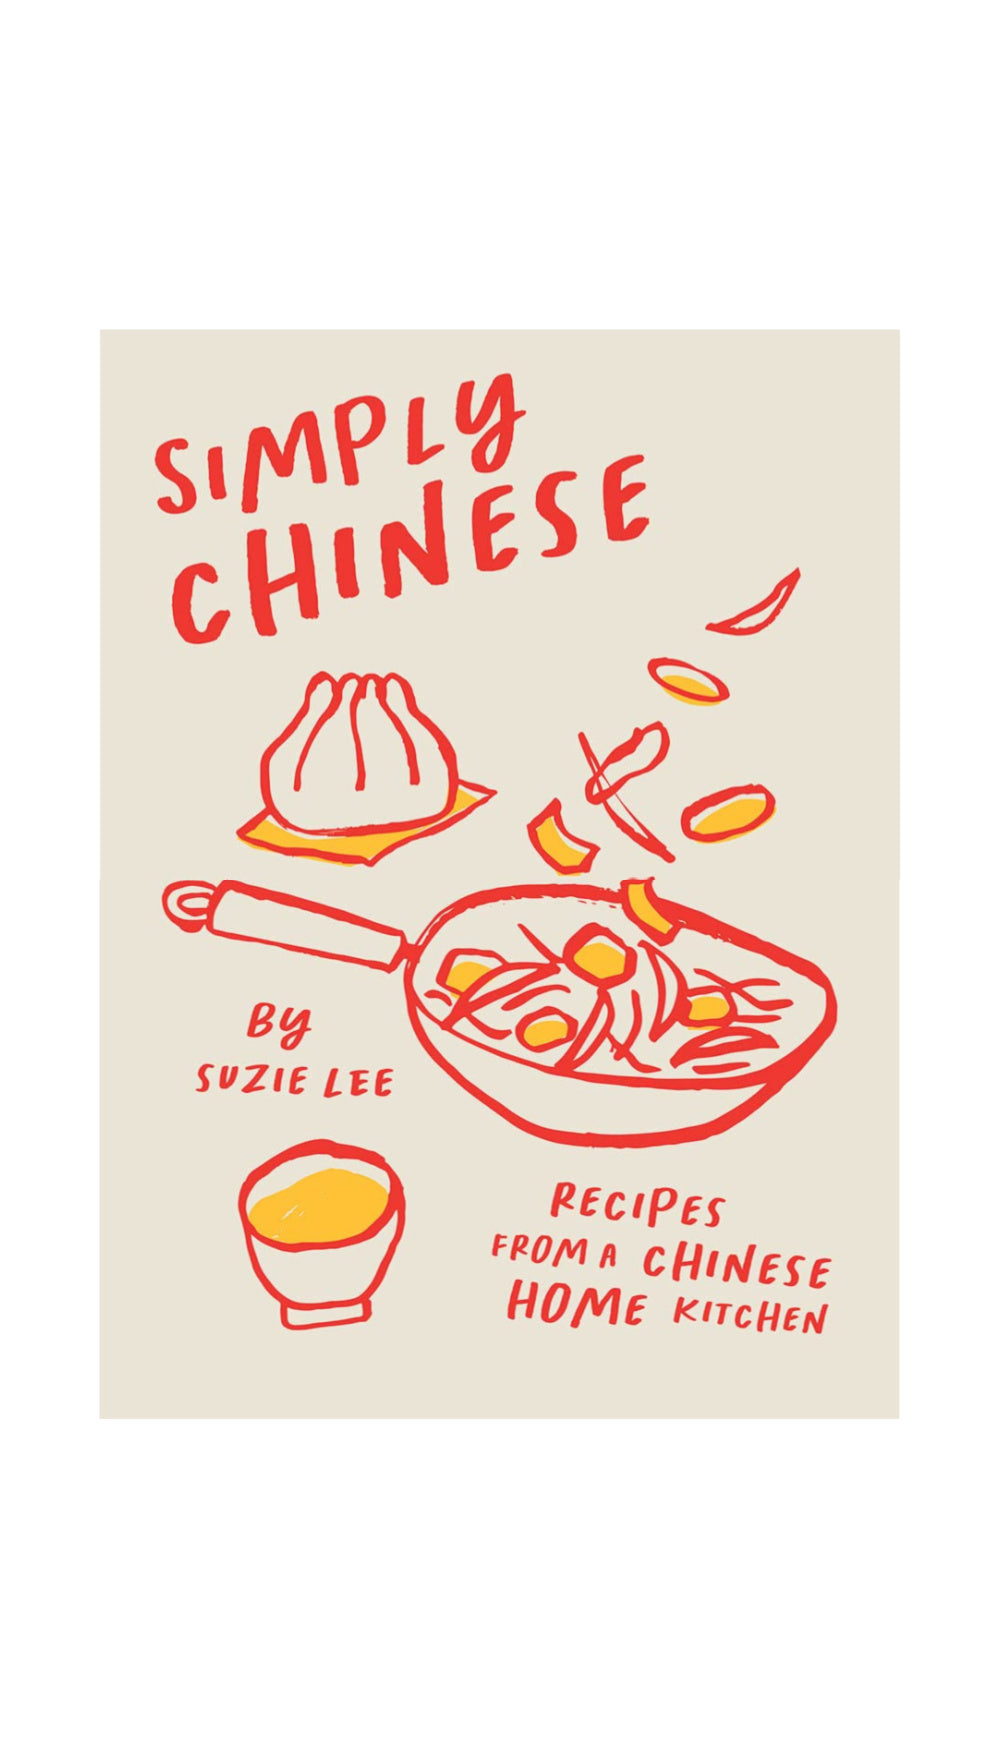 Simply Chinese / SUZIE LEE